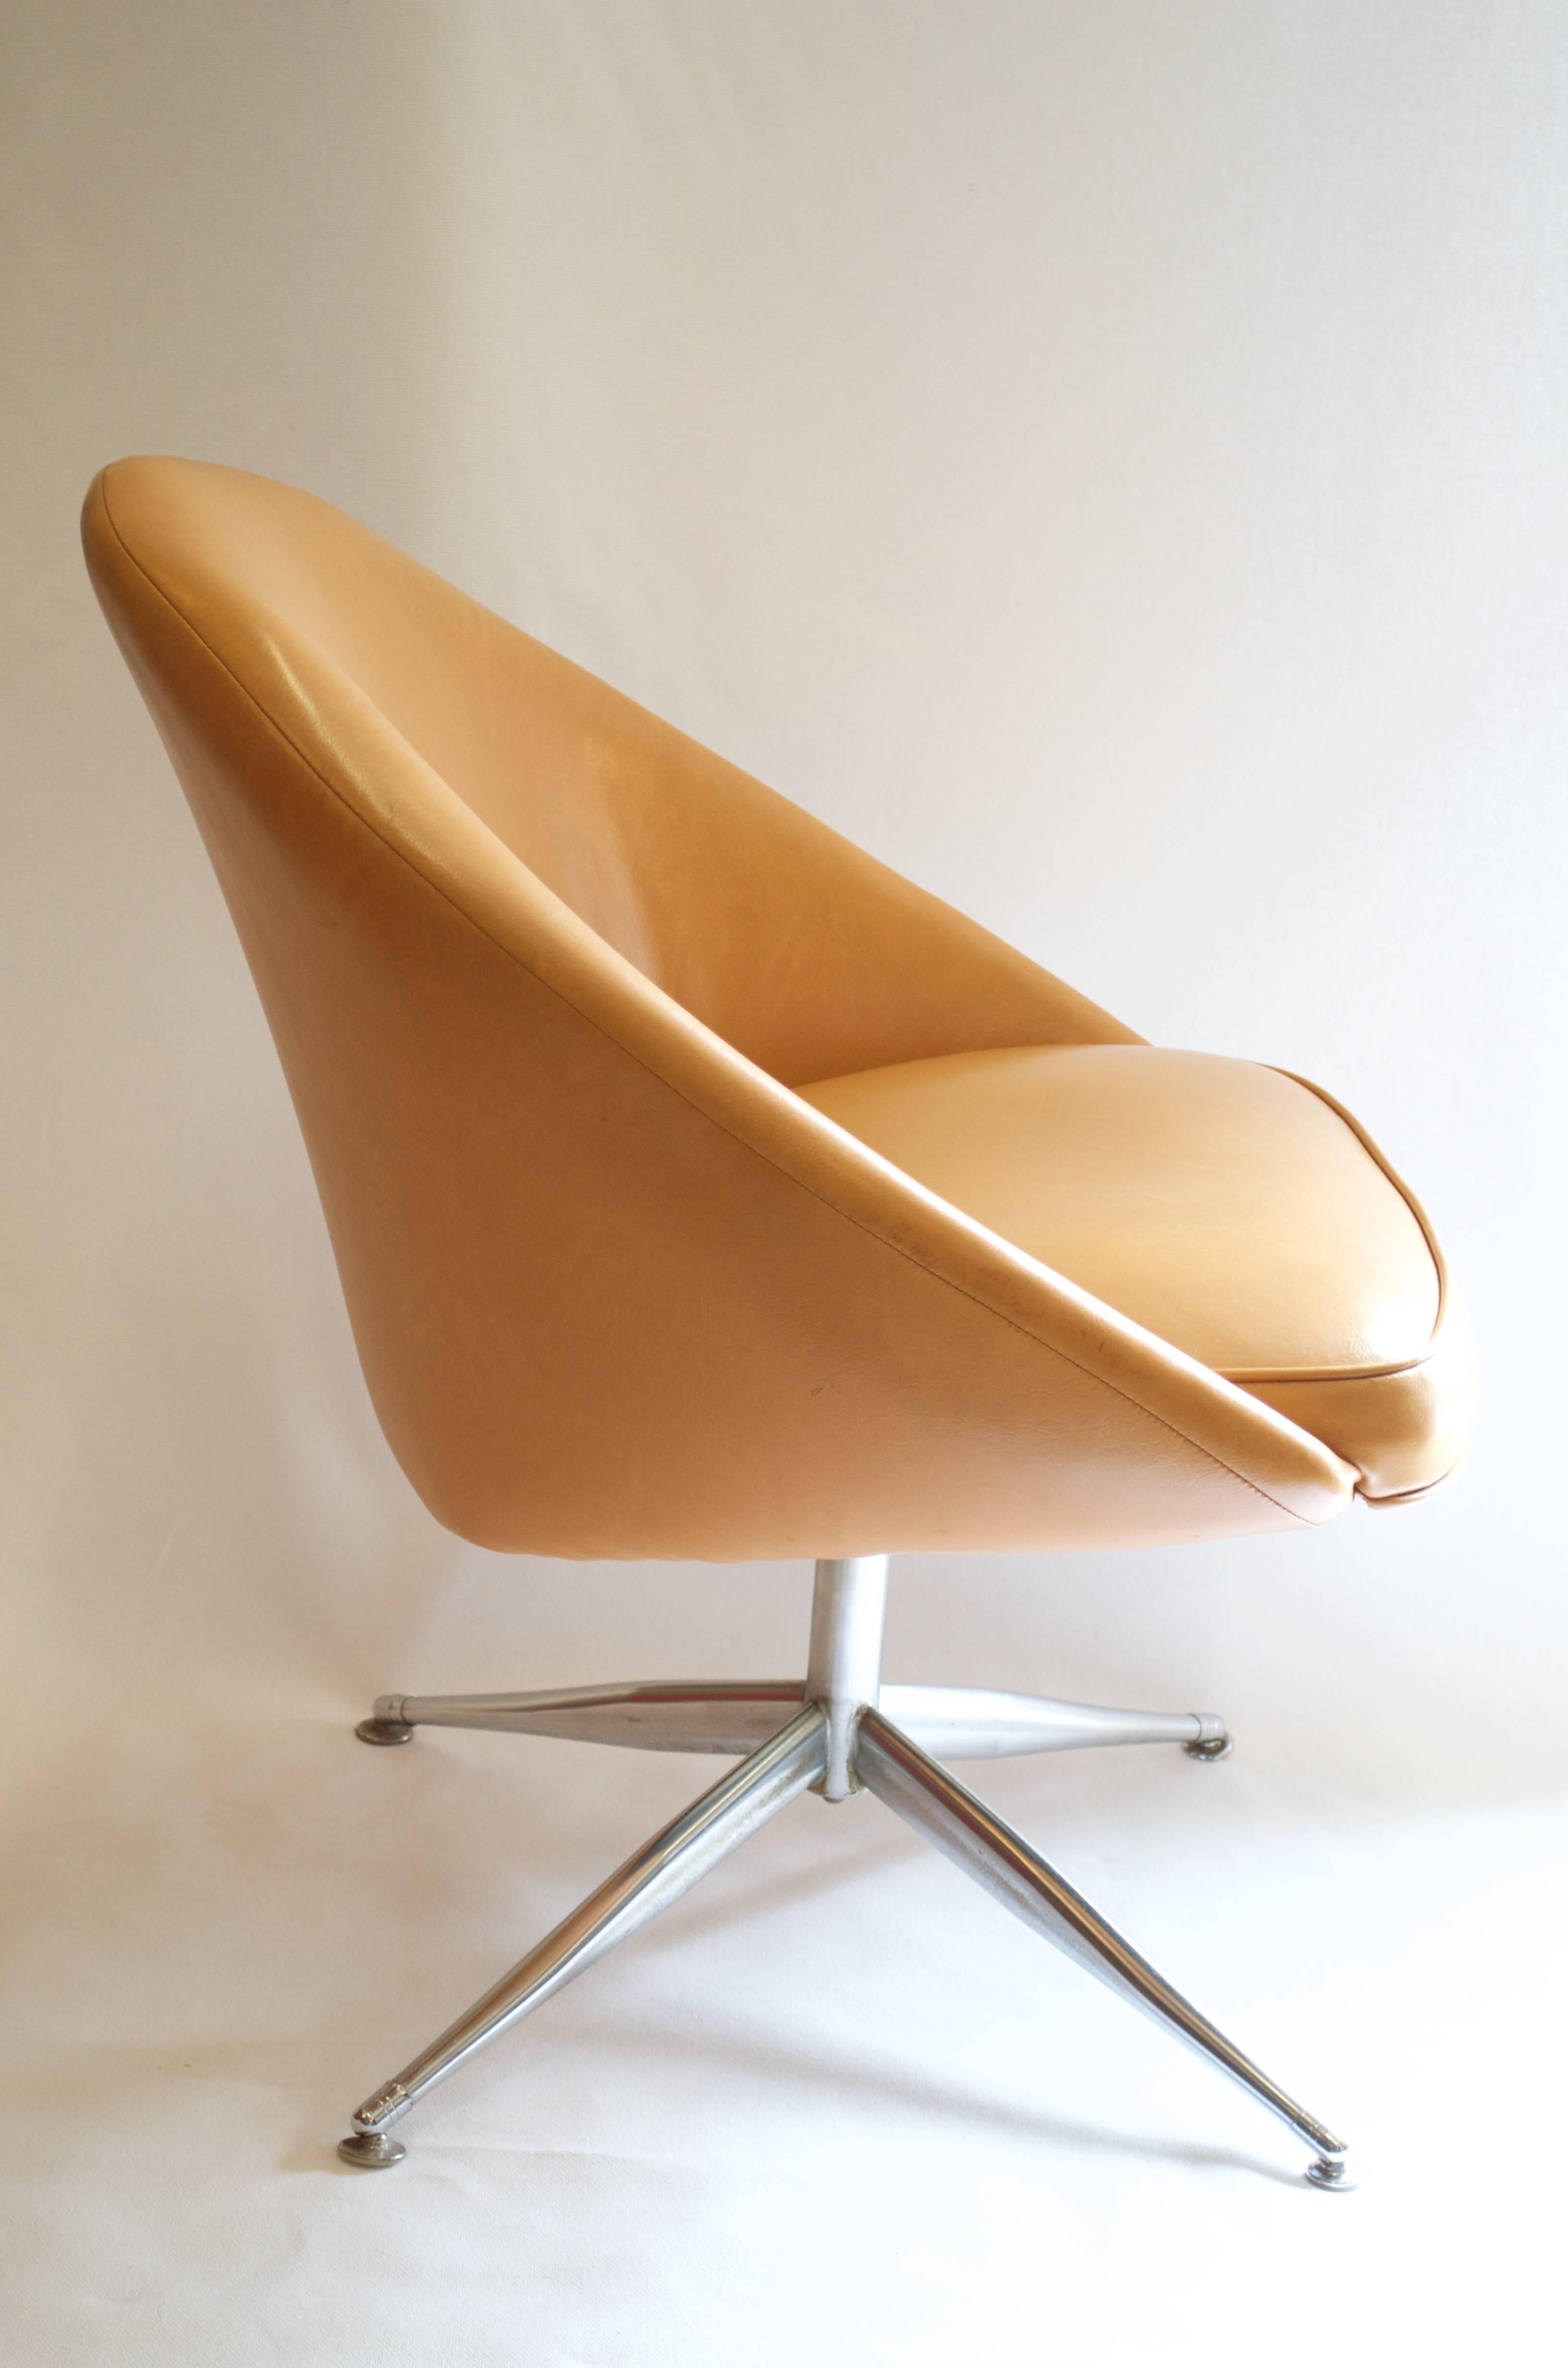 Mid-Century Modern Vanity Slipper Chair with Chrome Base in Camel Leather